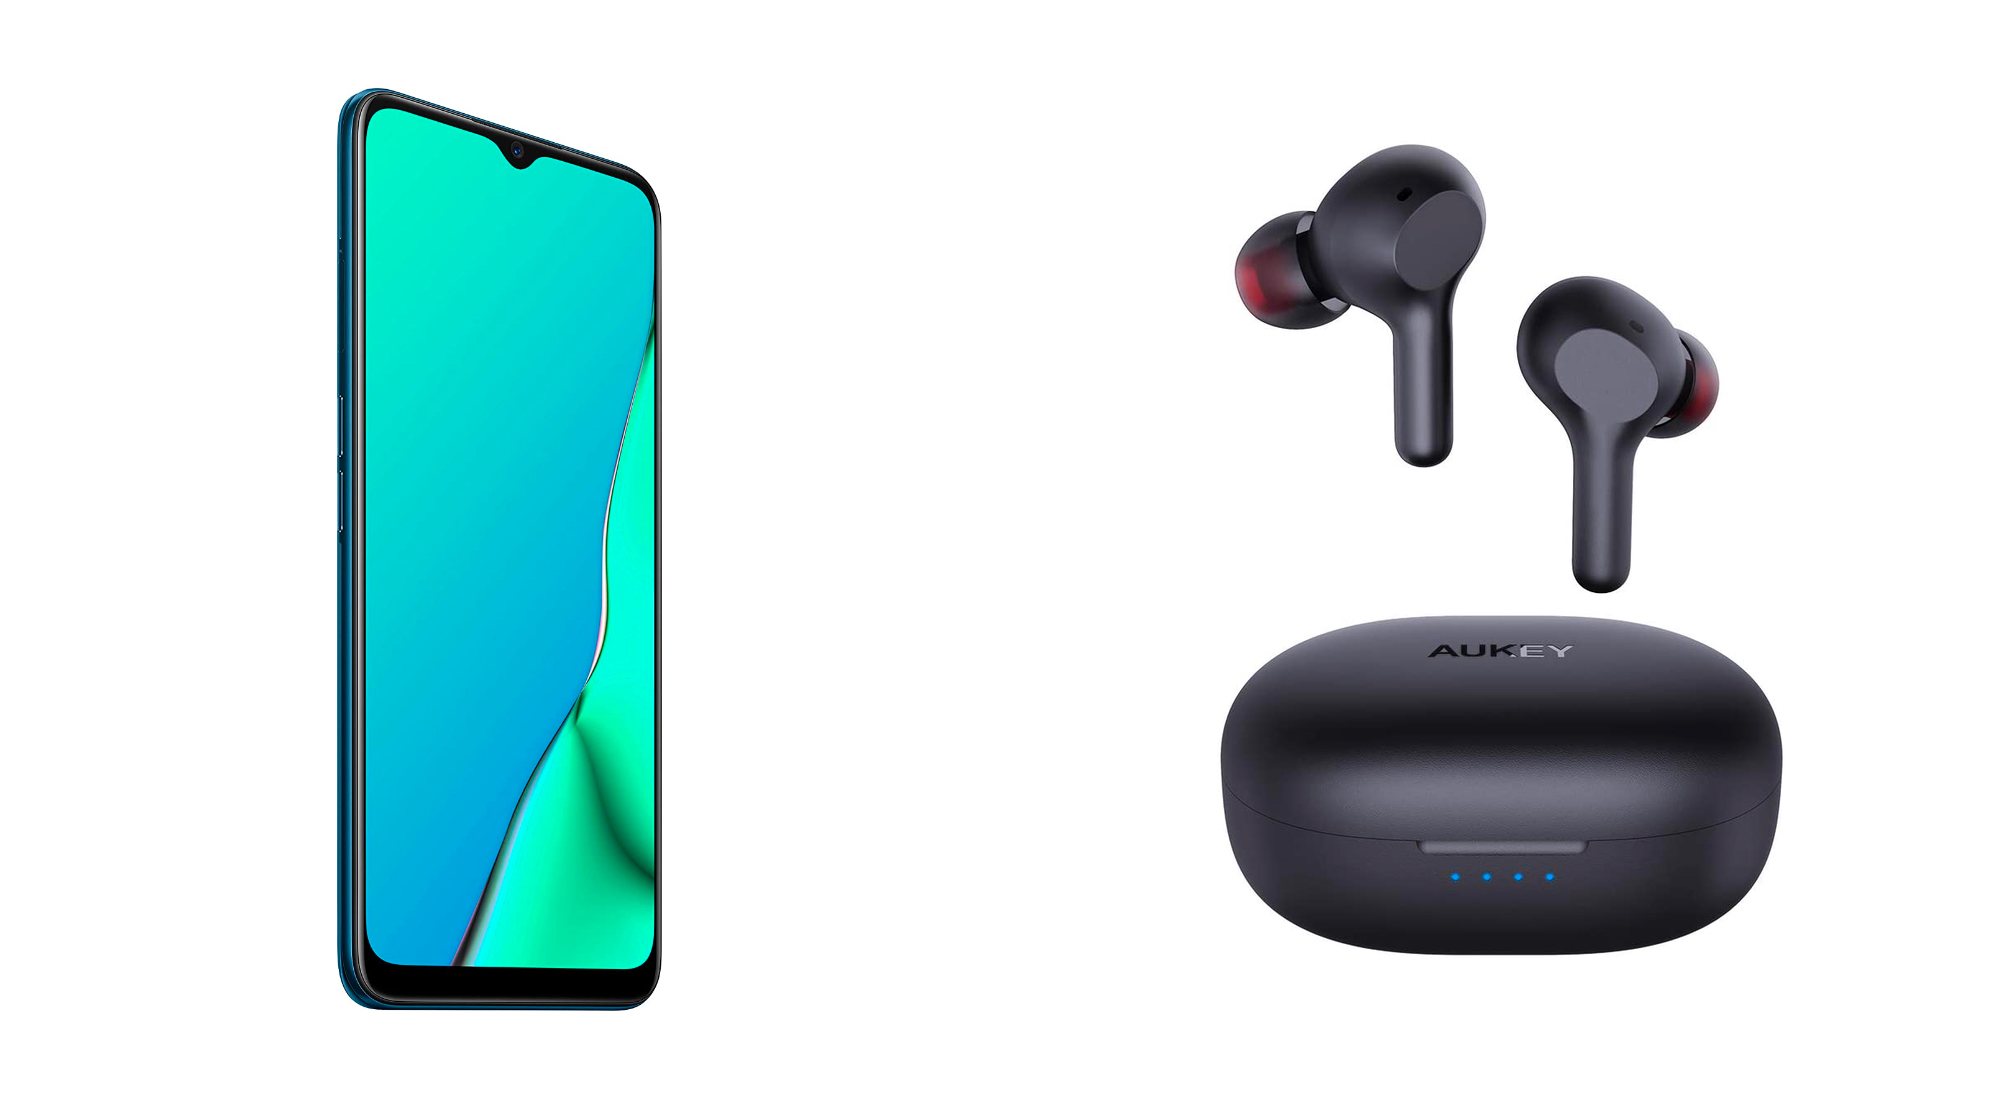 Oppo A9 y auriculares AUKEY